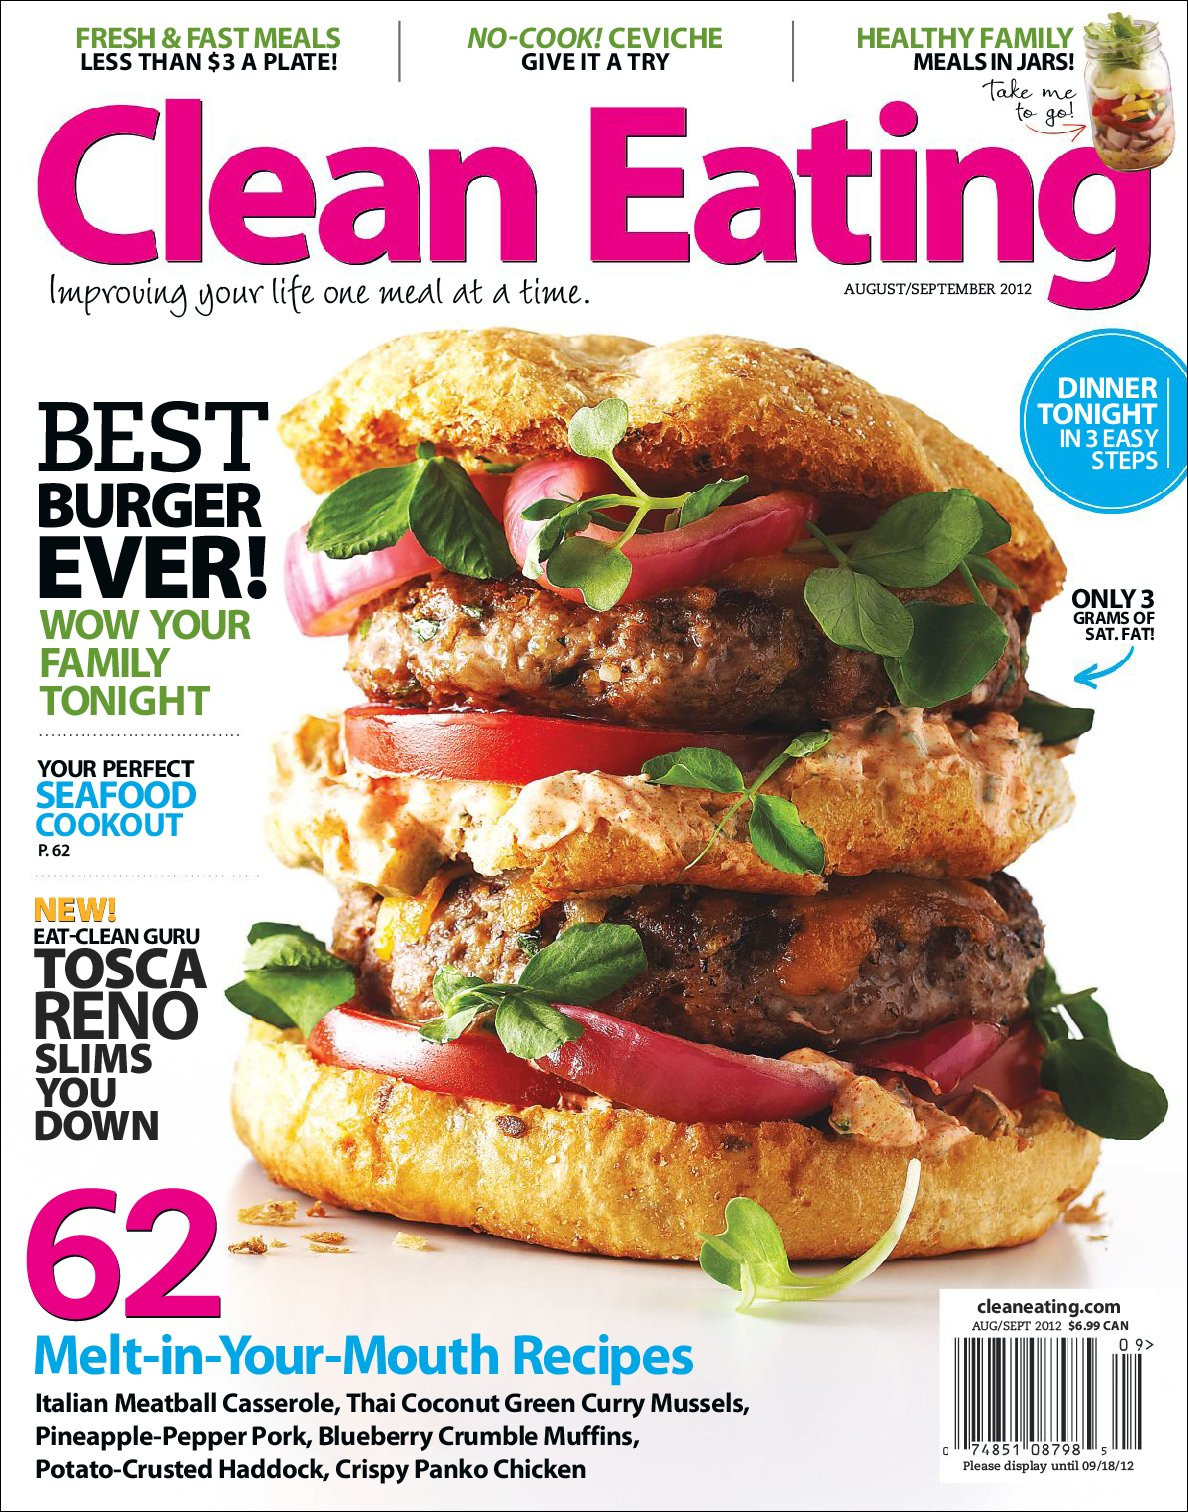 Clean Eating Magazine Subscription Discount
 FREE e Year Digital Subscription to Clean Eating